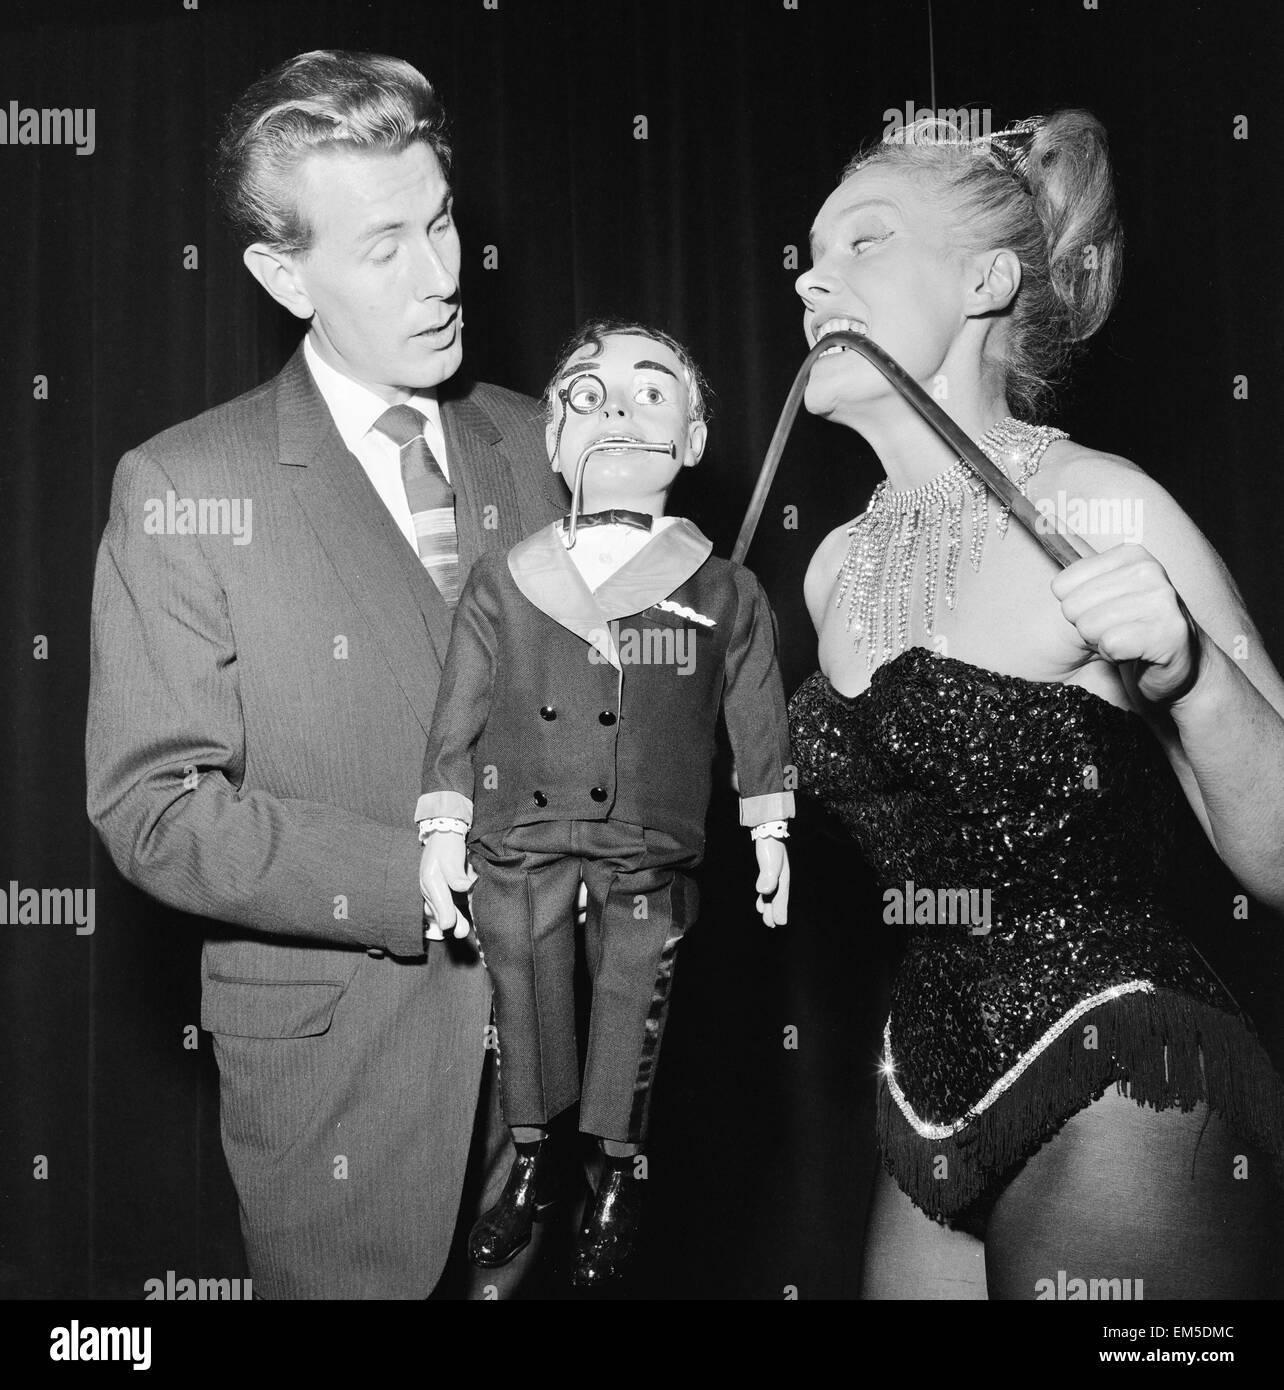 Ventriloquist Ray Alan with puppet Lord Charles, meet London Strong Woman Joan Rhodes at the Magic Circle Festival, being held at the Scala Theatre in London October 1962. Stock Photo